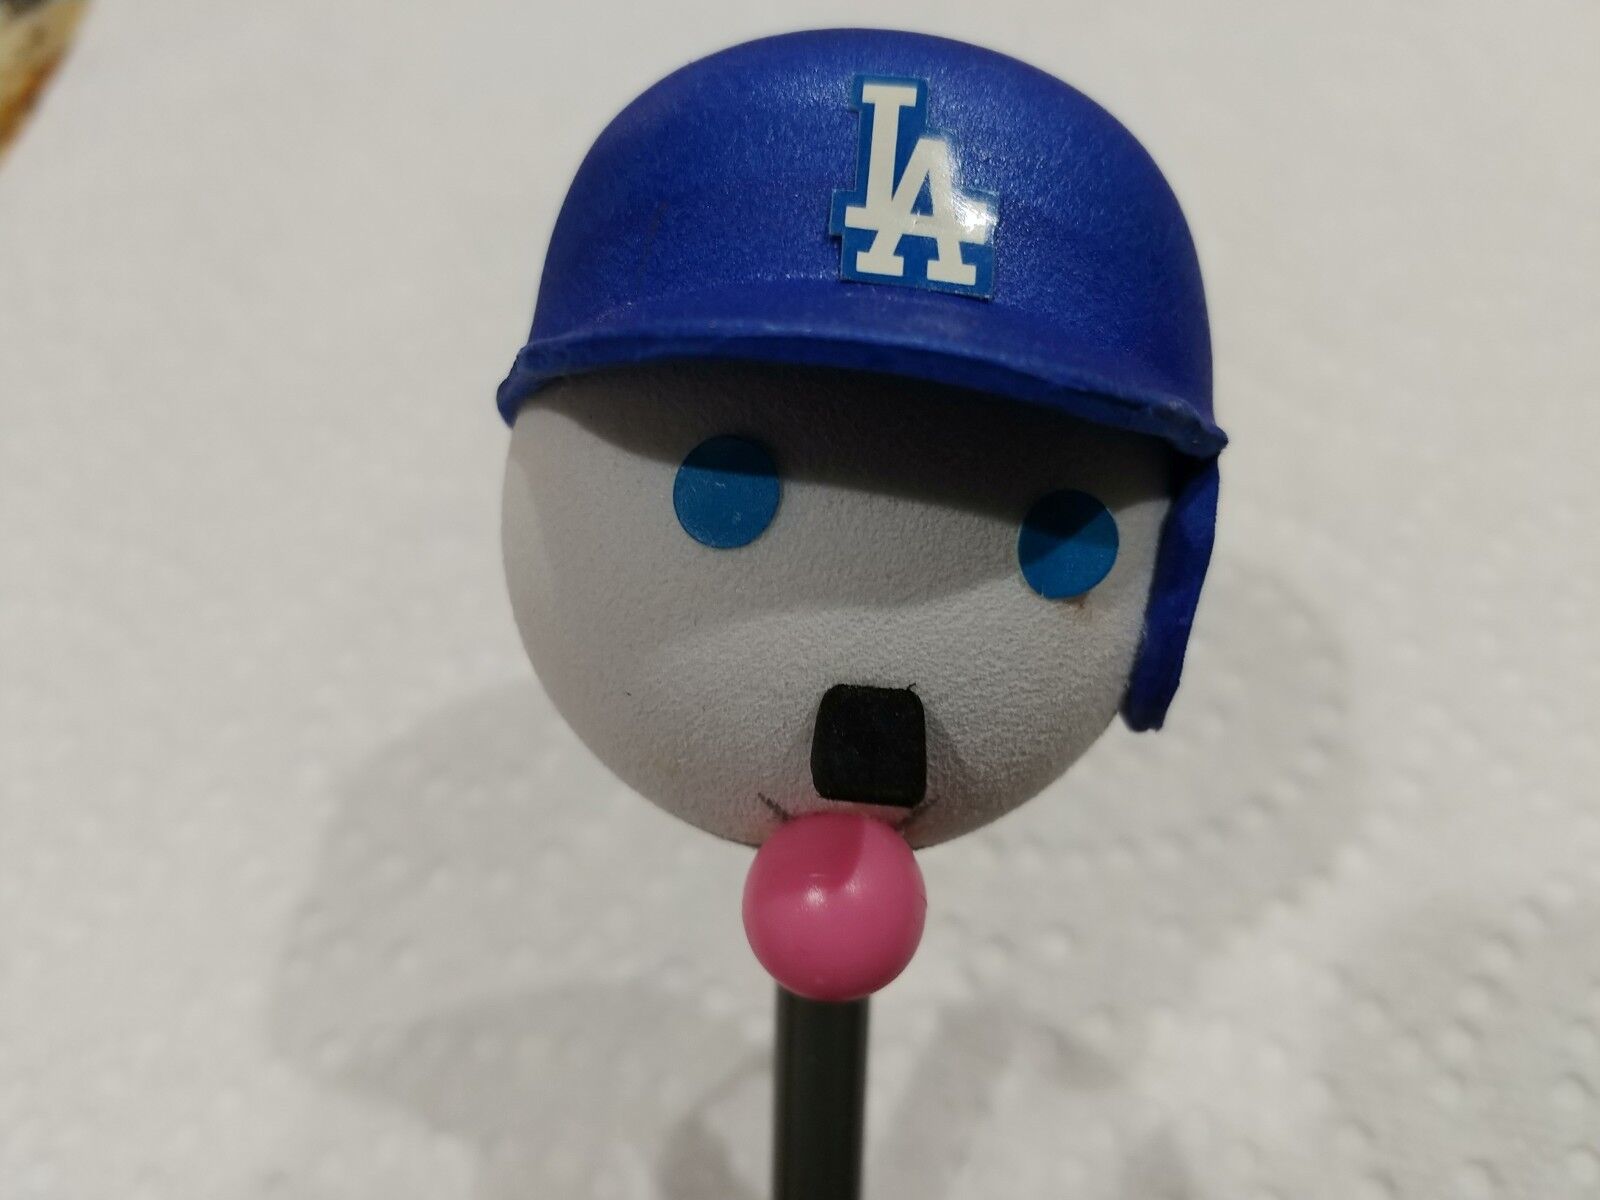 Collectible Los Angeles (LA) Dodgers Antenna Ball. A great stocking stuffer